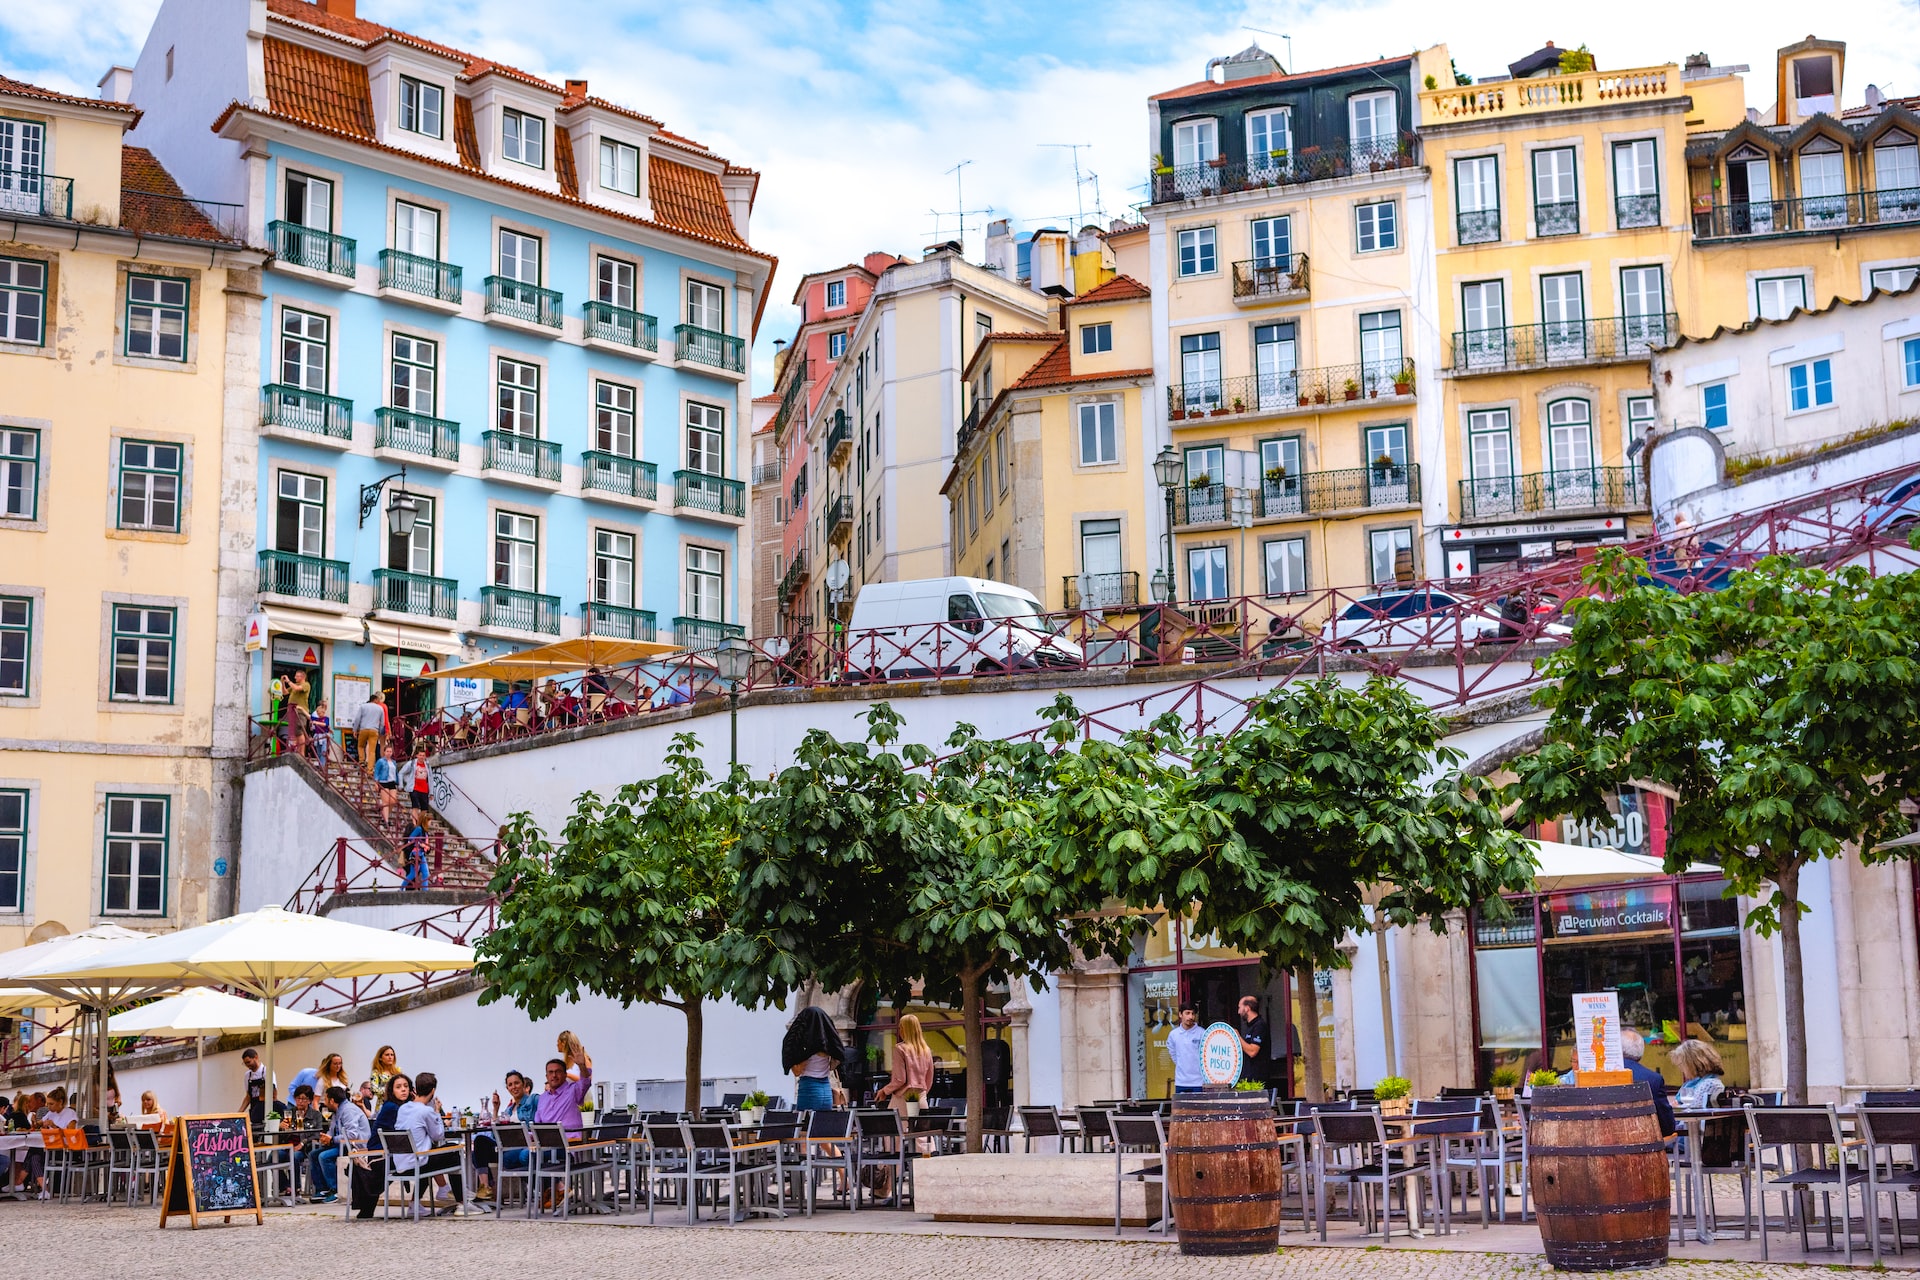 A cafe and colorful buildings in Lisbon.